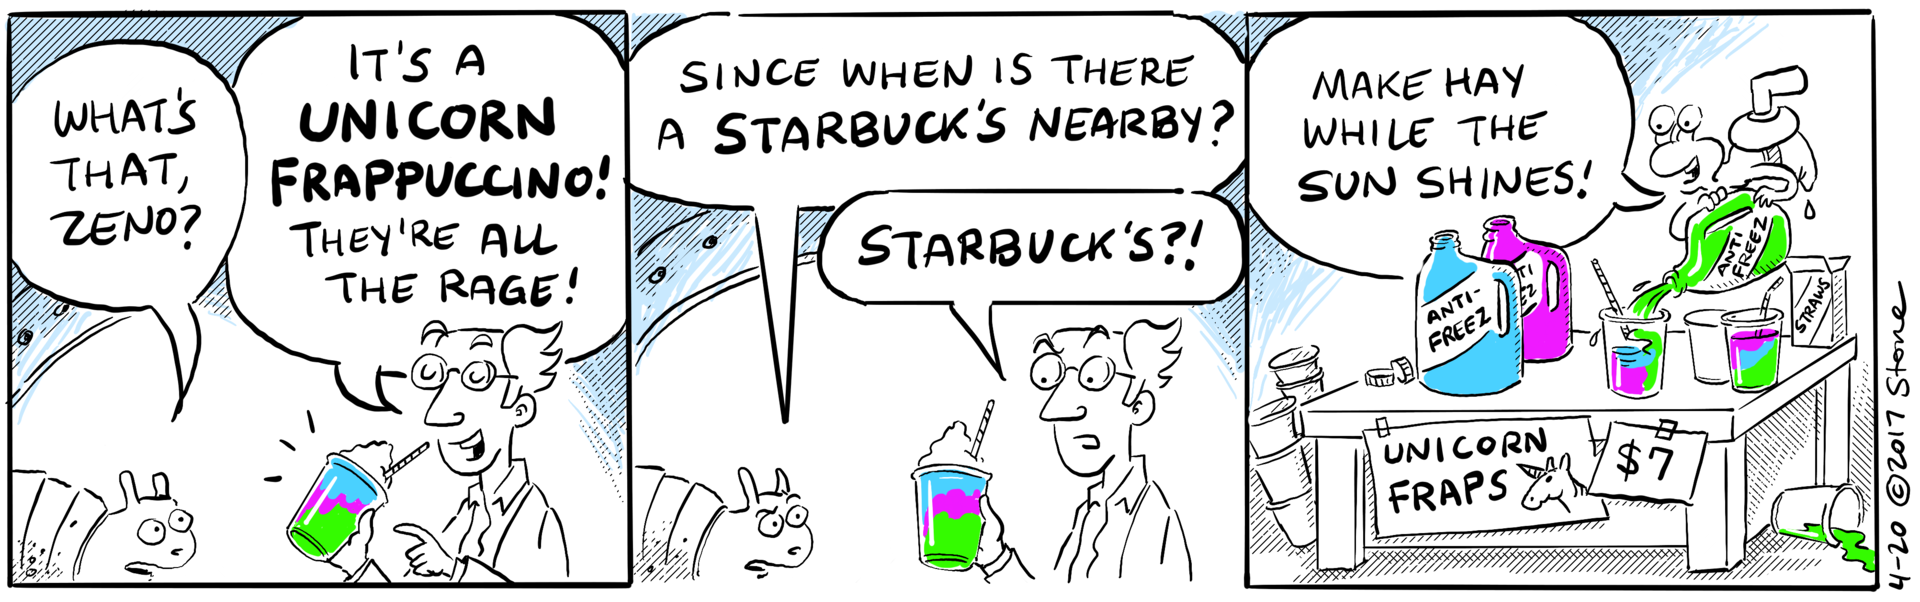 U-Gene tries to take on Starbucks Unicorn Frappuccino business, but instead ends up vomiting rainbows.